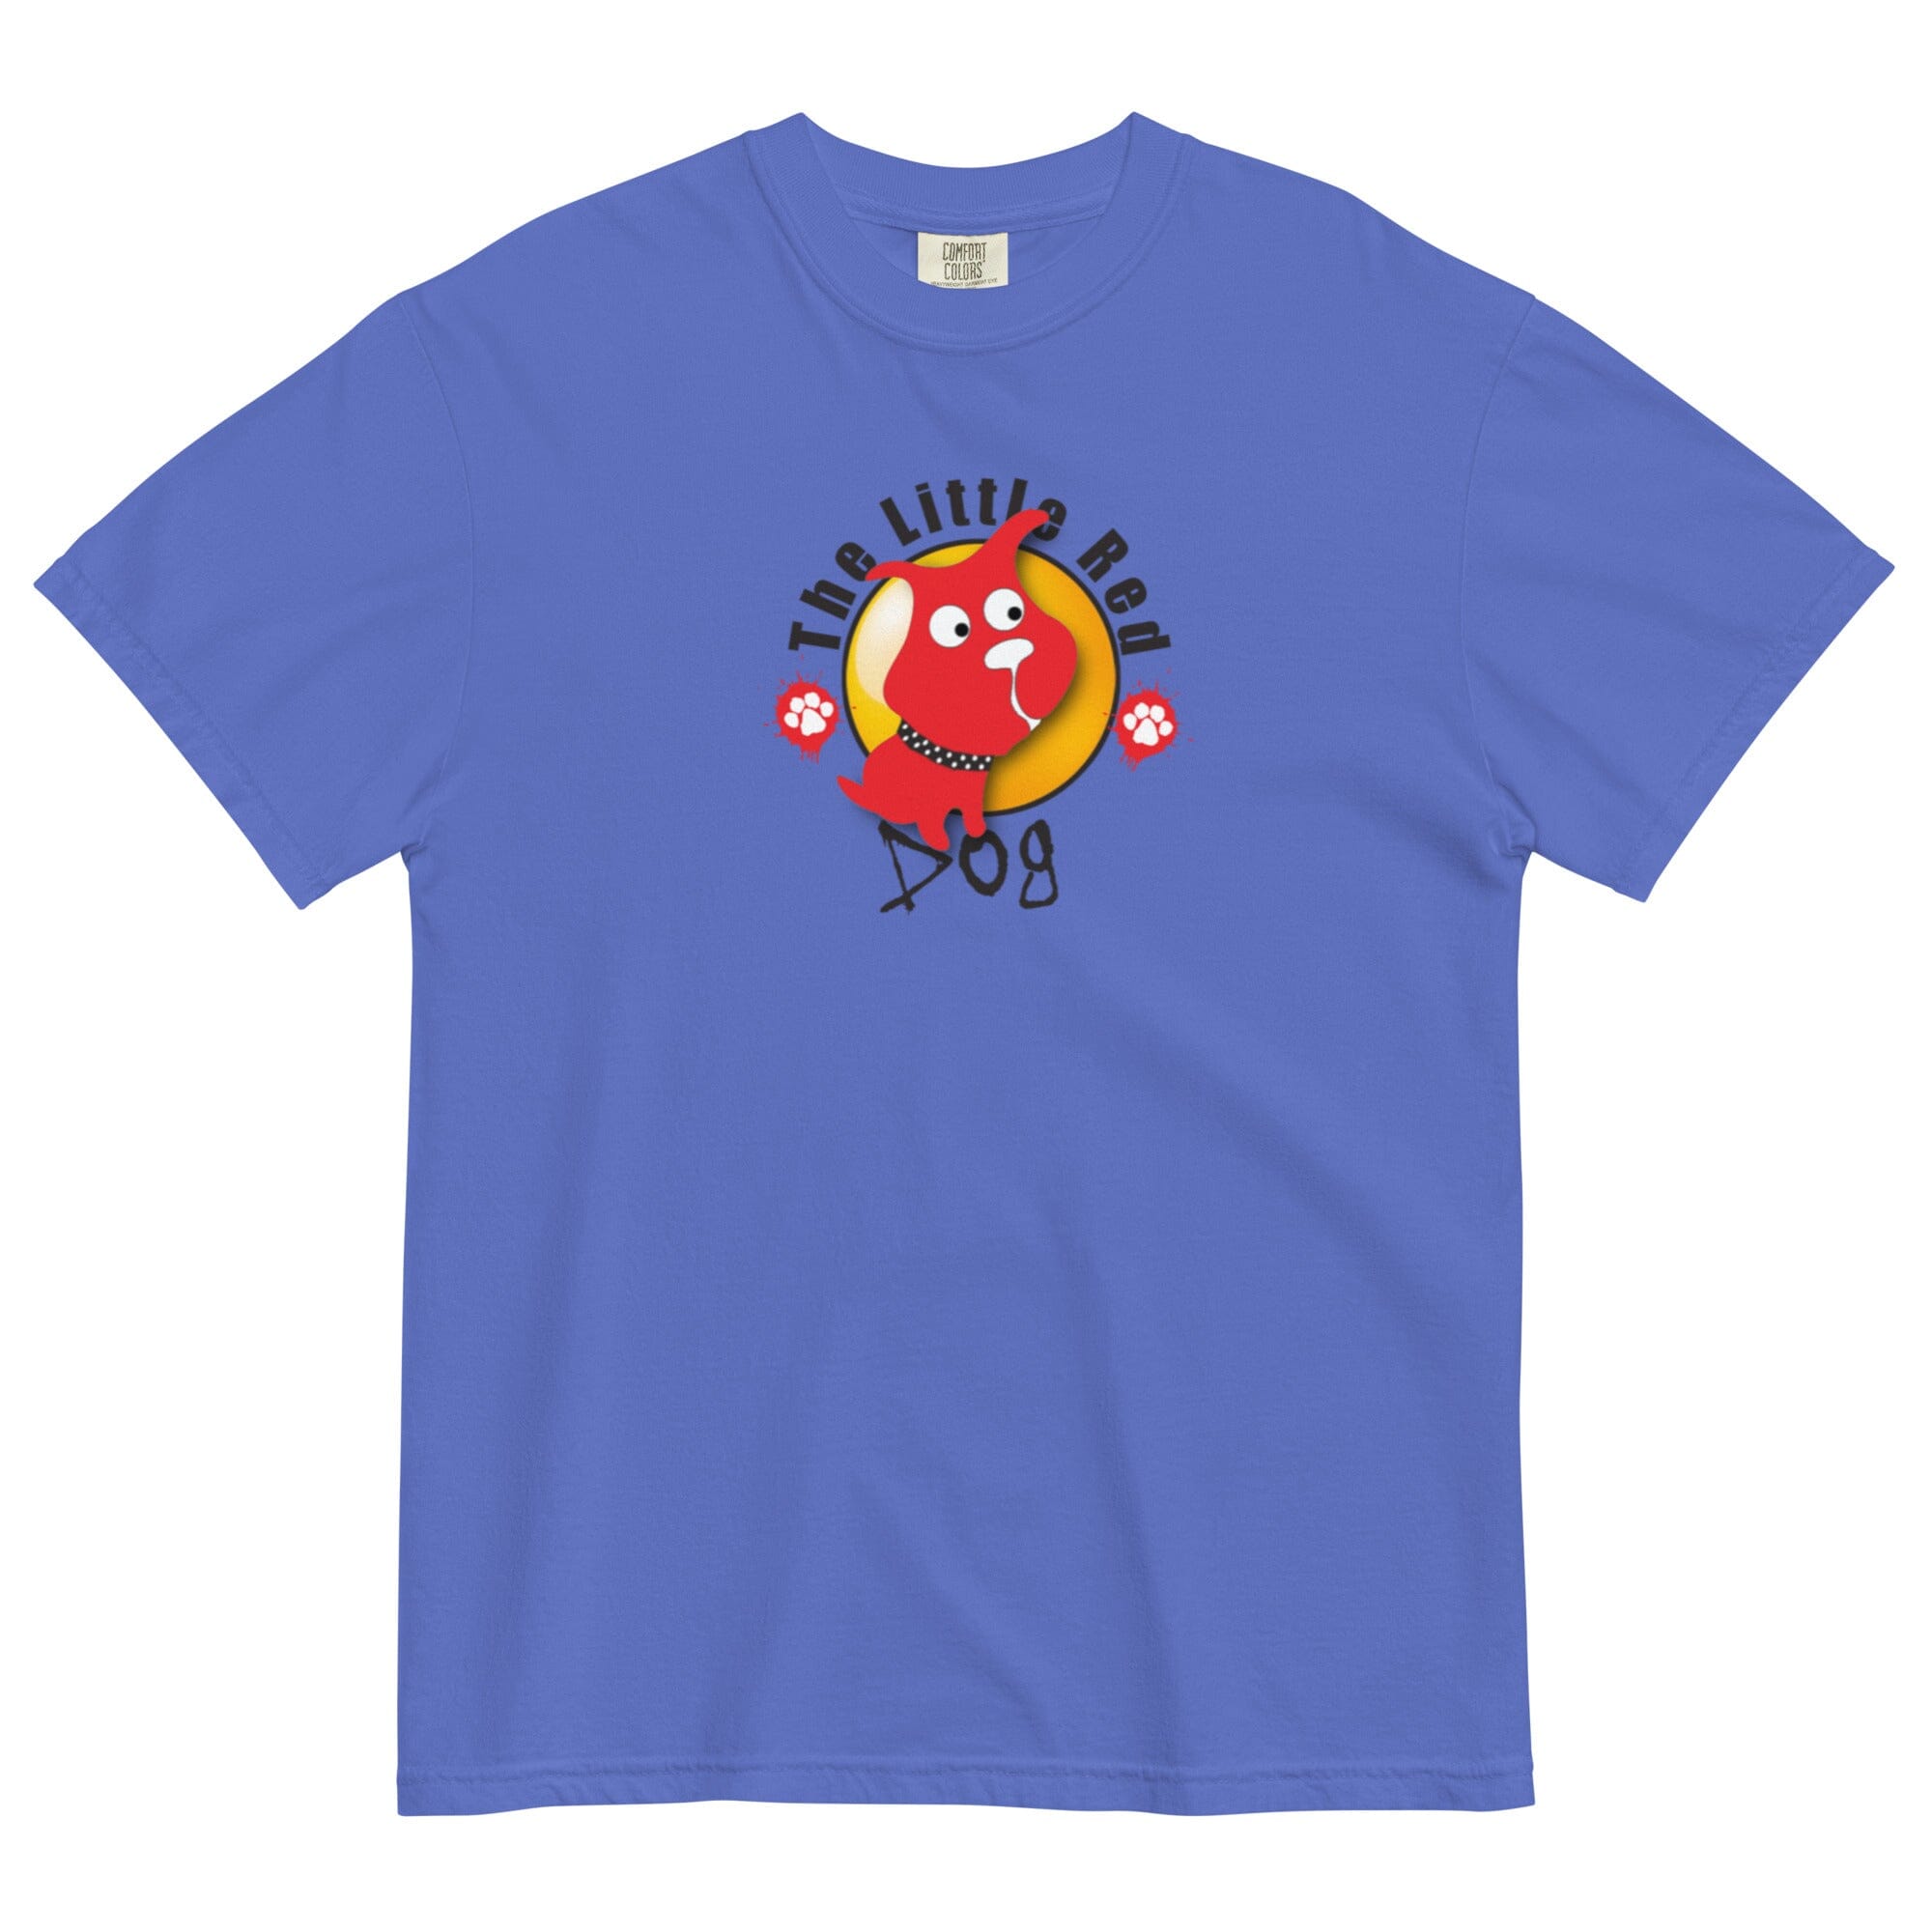 The Little Red Dog Rescue Uni T